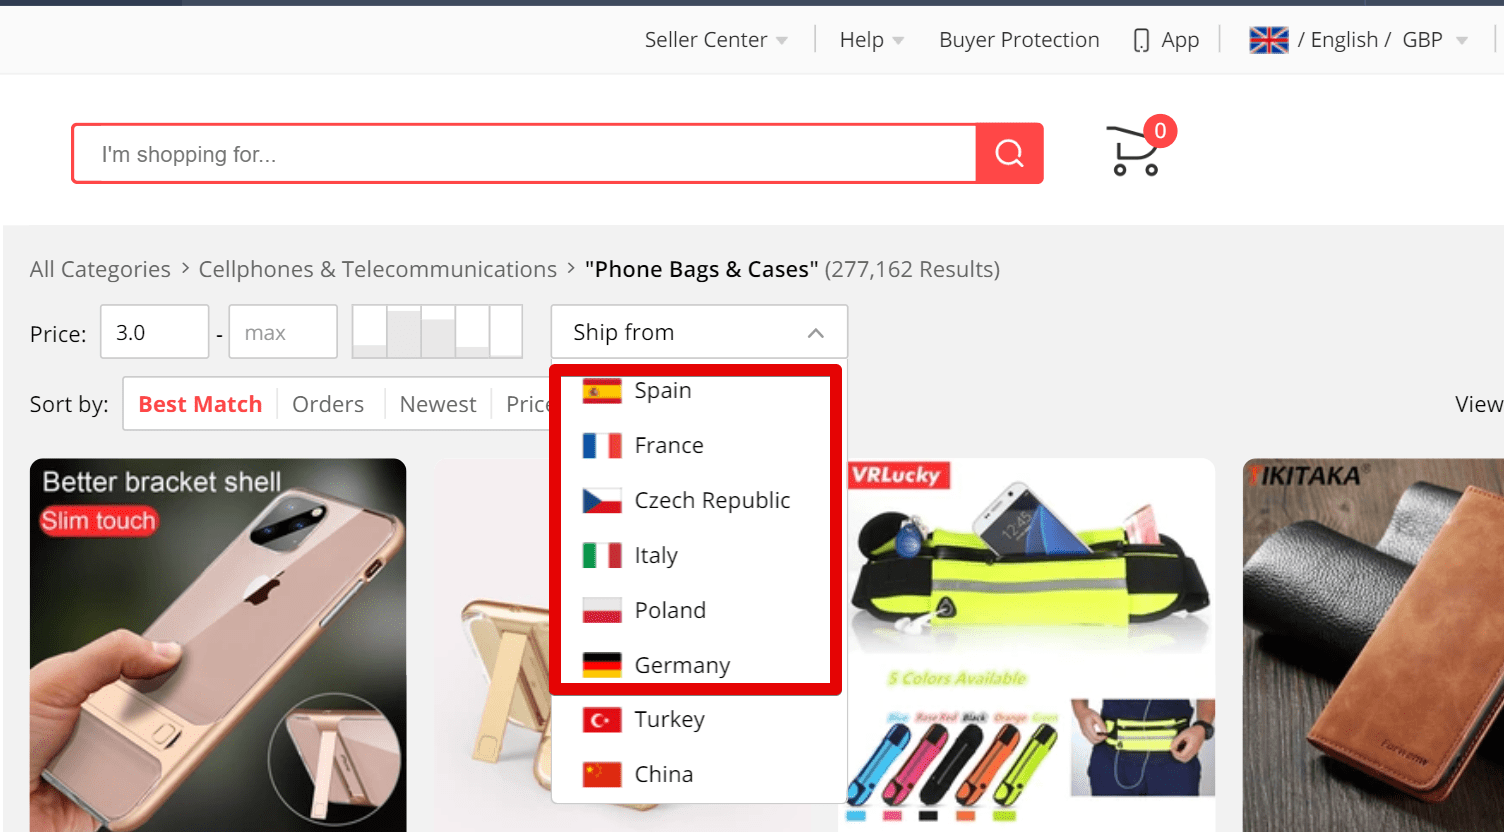 Screenshot of AliExpress search page where you can look for products that can be delivered from particular countries - Spain, France, Czech Republic, Italy, Poland and Germany